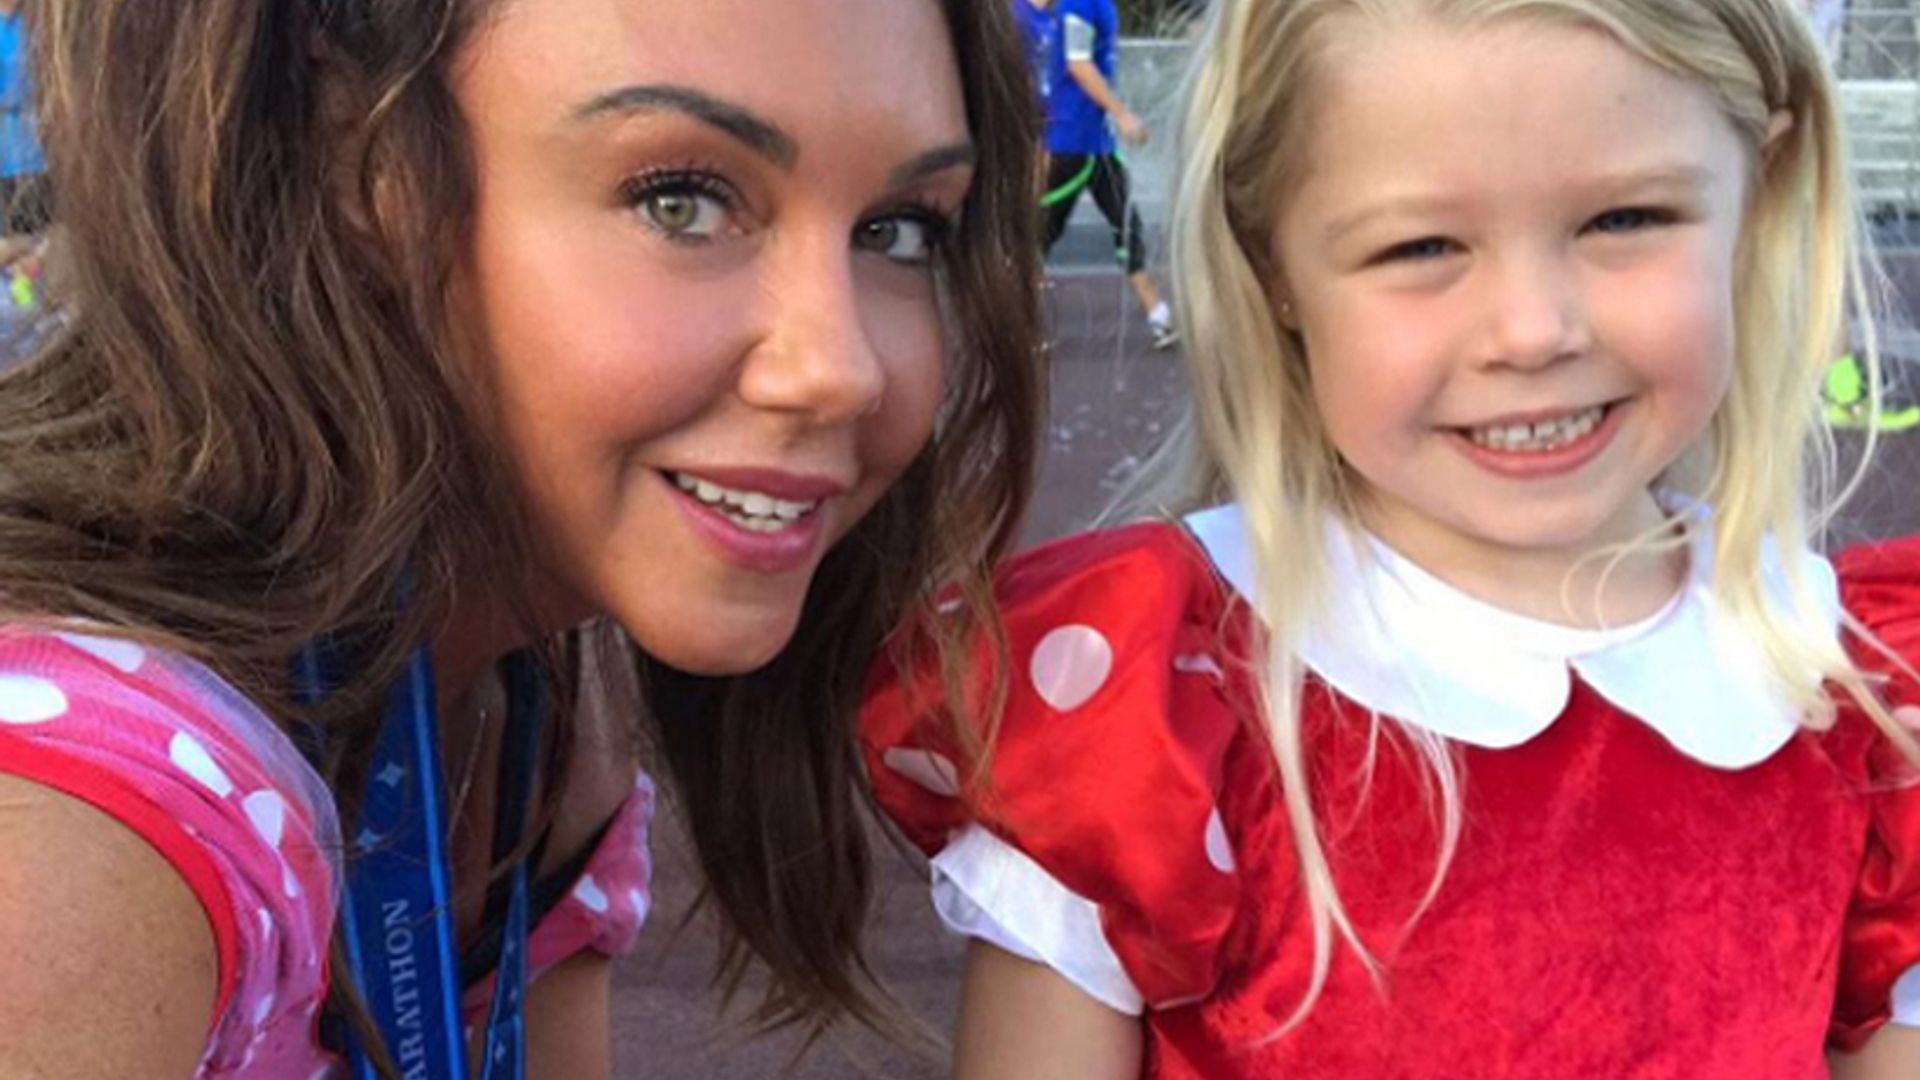 Exclusive: Michelle Heaton shares worries for 5-year-old daughter who may carry same cancer gene